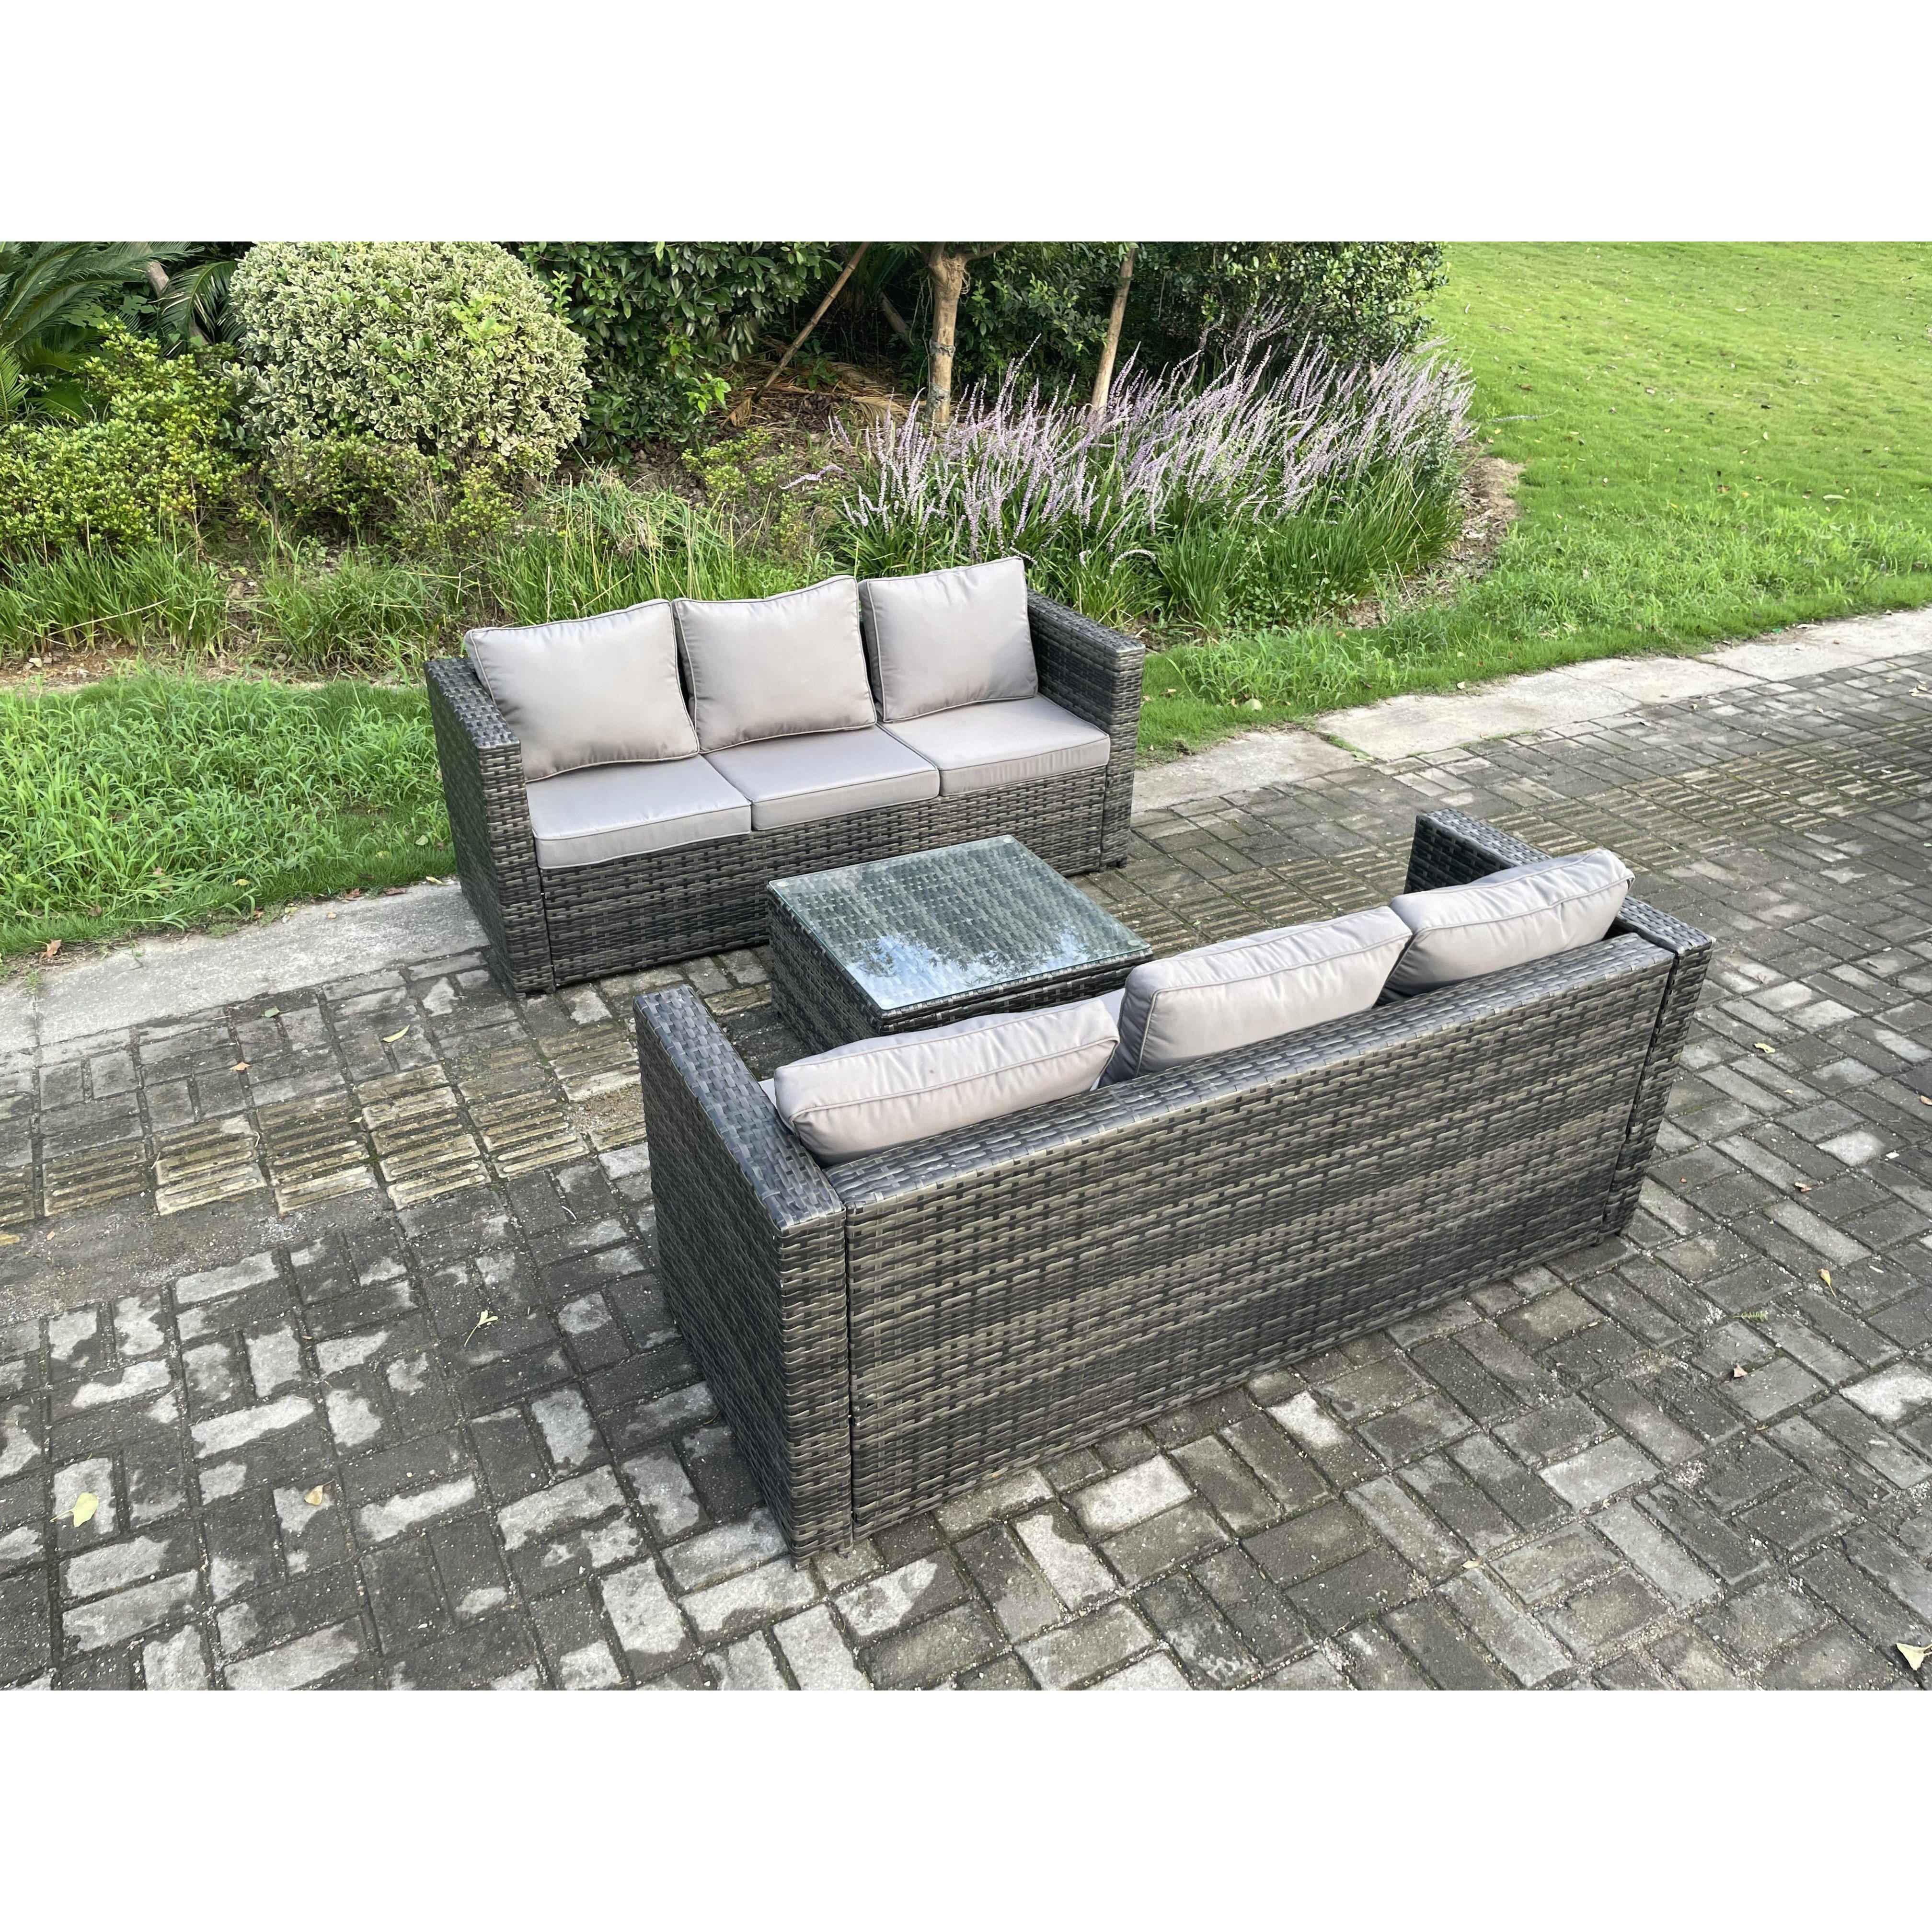 Wicker Rattan Garden Furniture Sofa Set with Square Coffee Table 6 Seater Outdoor Rattan Set Dark Grey Mixed - image 1